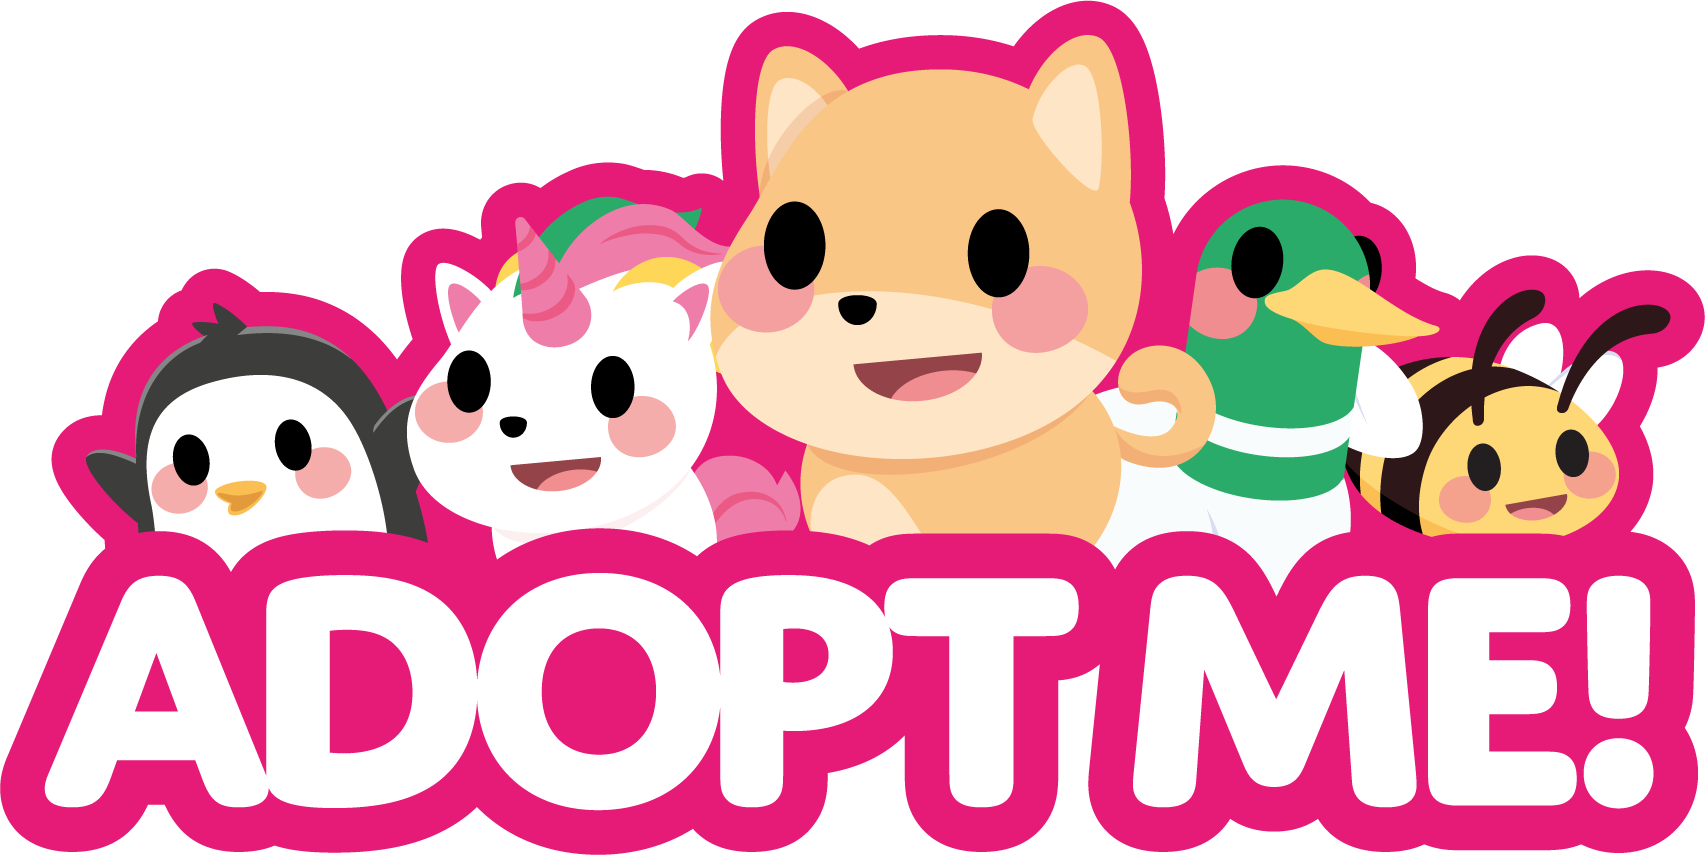 Adopt Me! Pets Multipack Animal Life - Hidden Pet - Top Online Game,  Exclusive Virtual Item Code Included - Fun Collectible Toys for Kids  Featuring